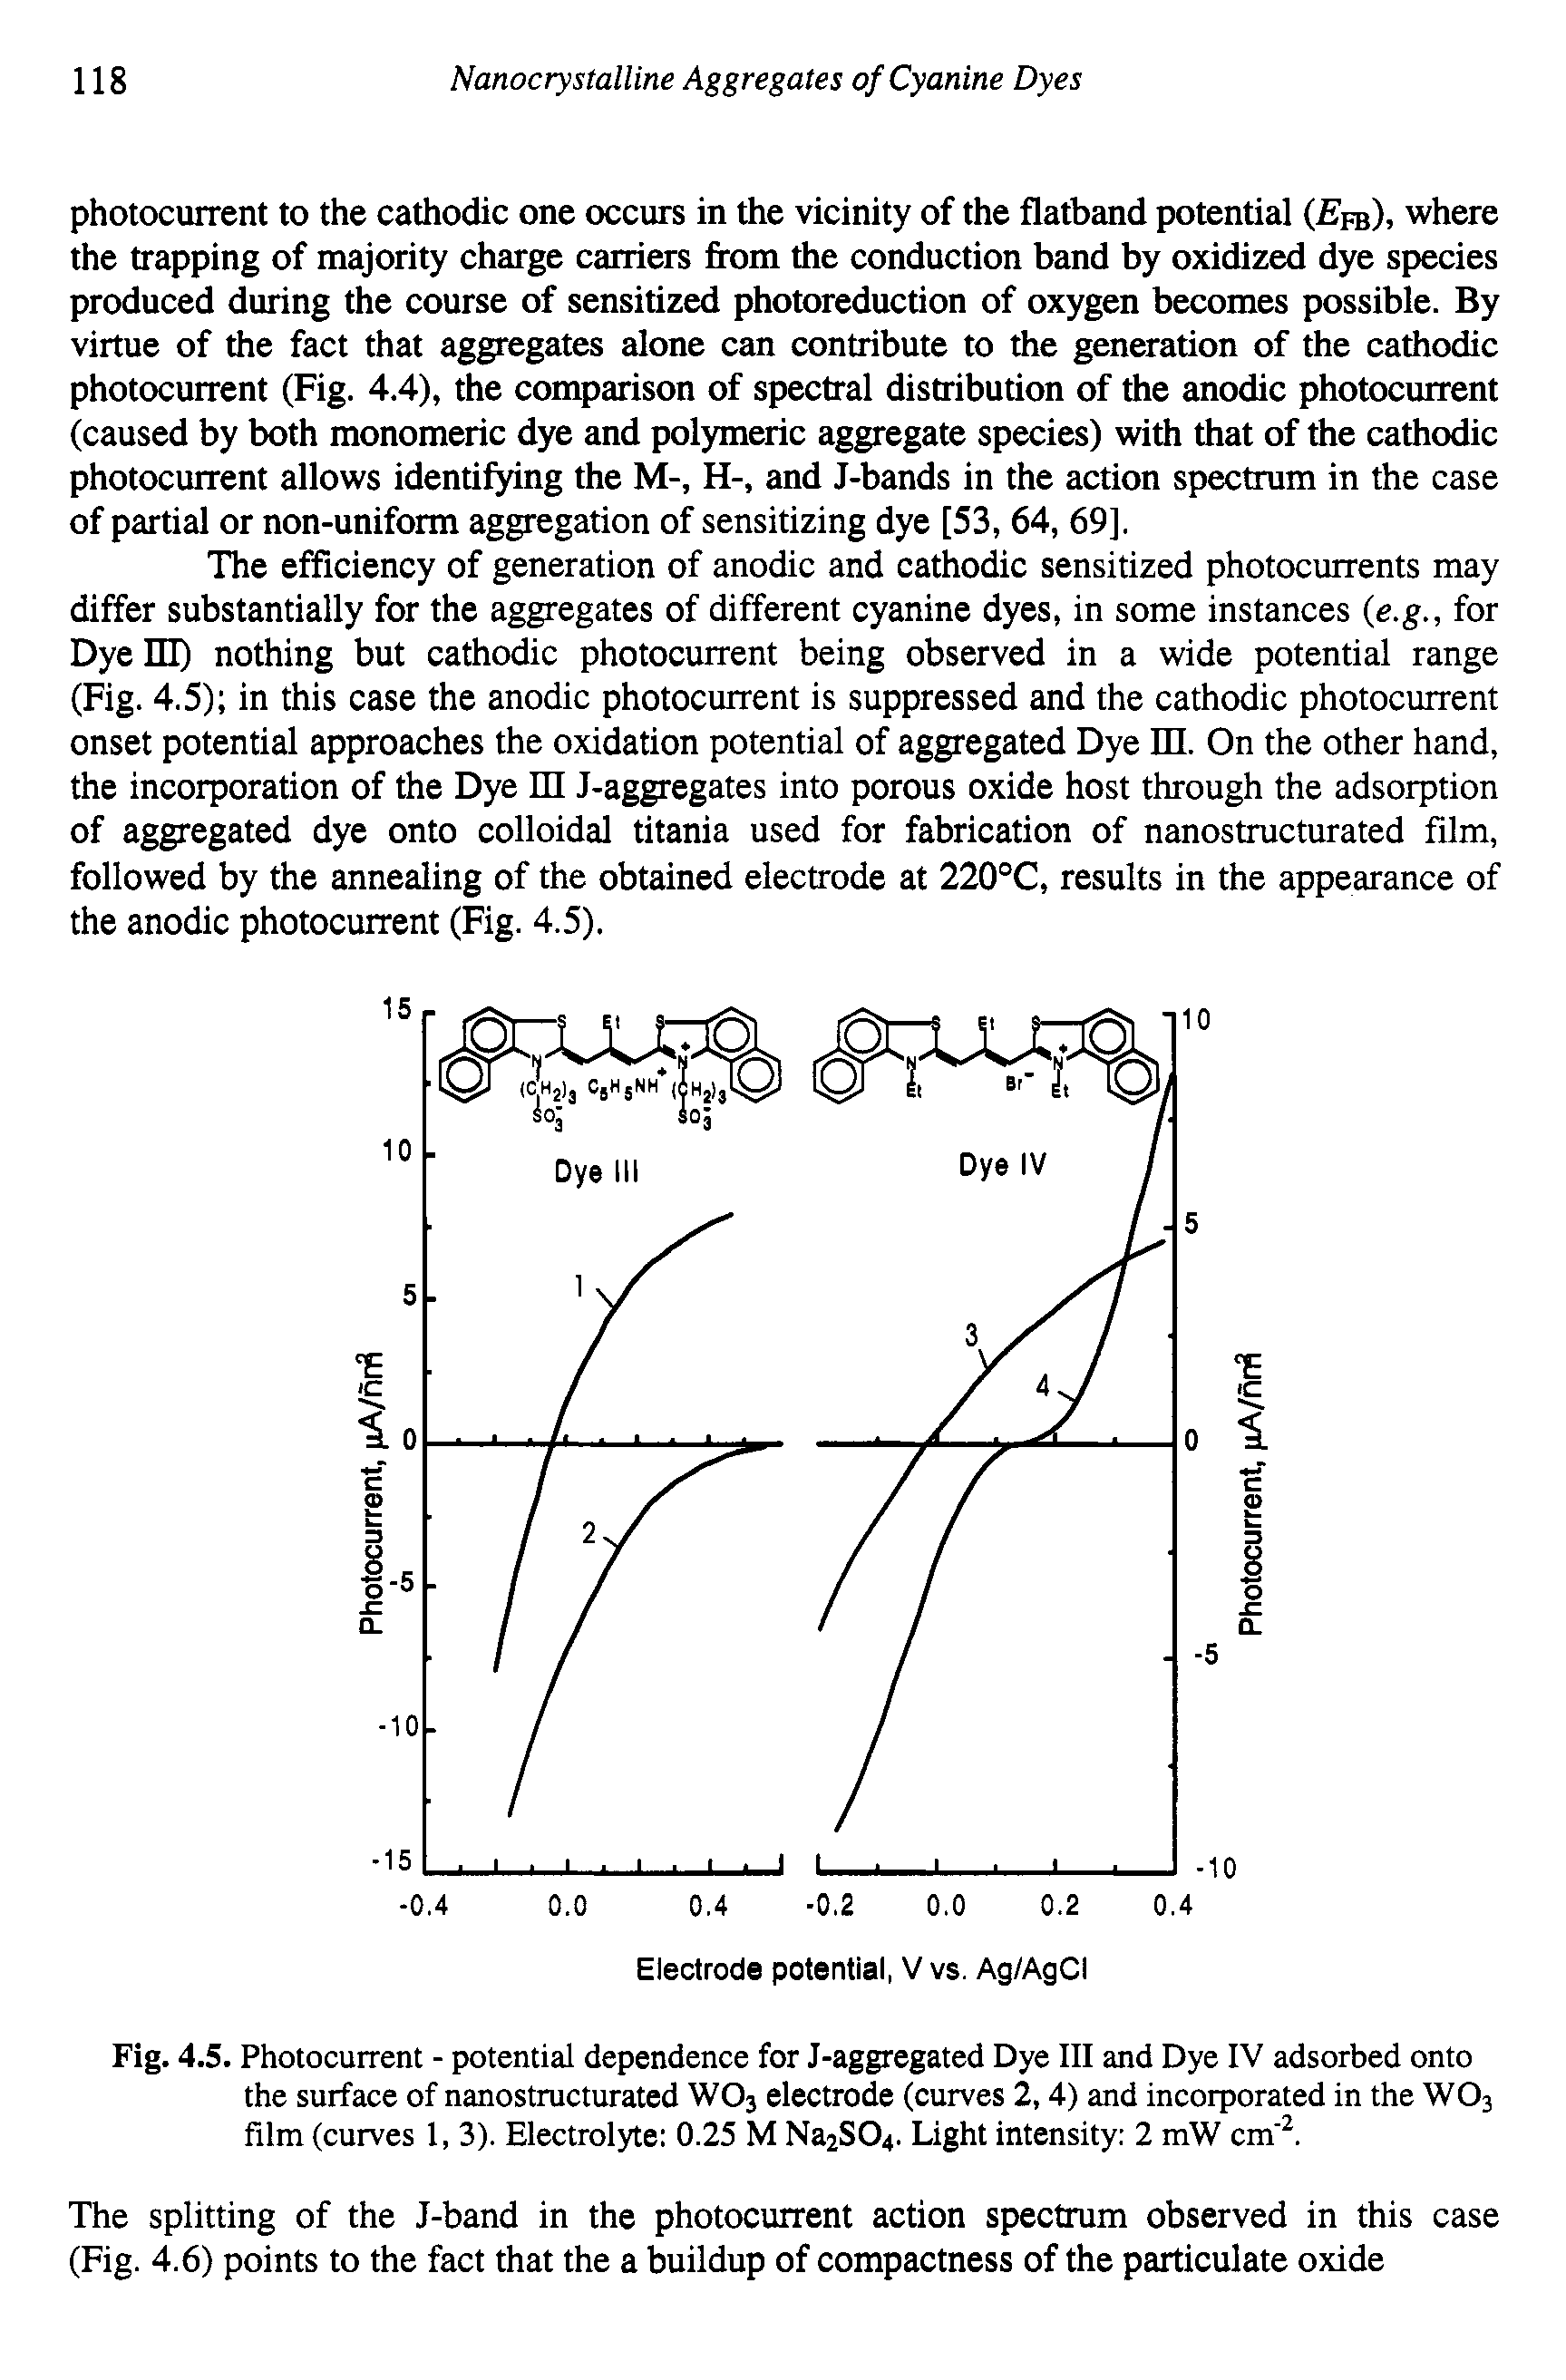 Fig. 4.5. Photocurrent - potential dependence for J-aggregated Dye III and Dye IV adsorbed onto the surface of nanostructurated W03 electrode (curves 2,4) and incorporated in the W03 film (curves 1, 3). Electrolyte 0.25 M Na2S04. Light intensity 2 mW cm 2.